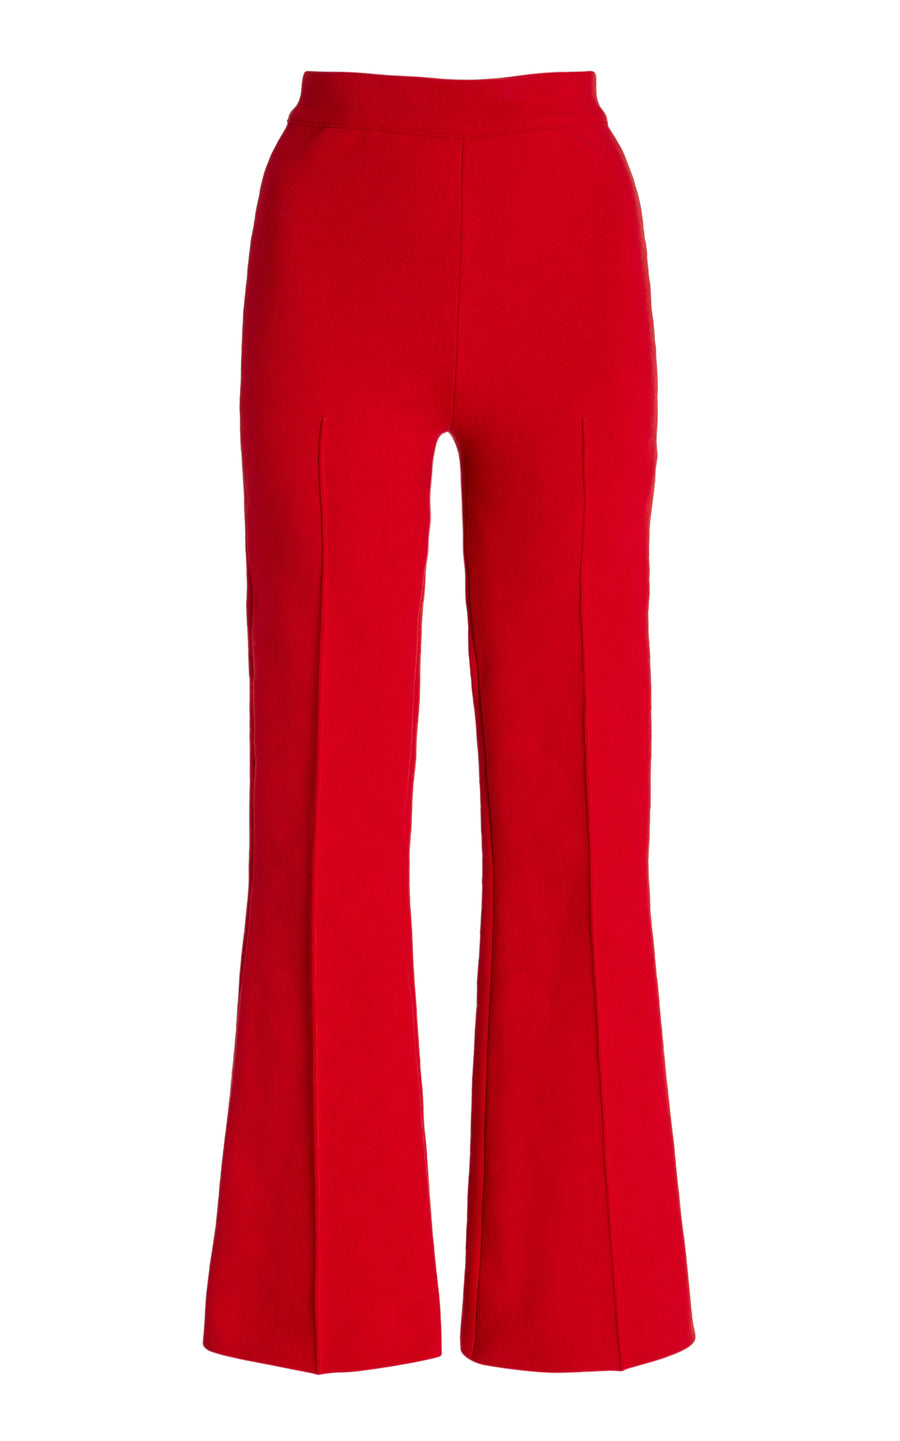 Kick Pant - Red (By Phone Order Only)